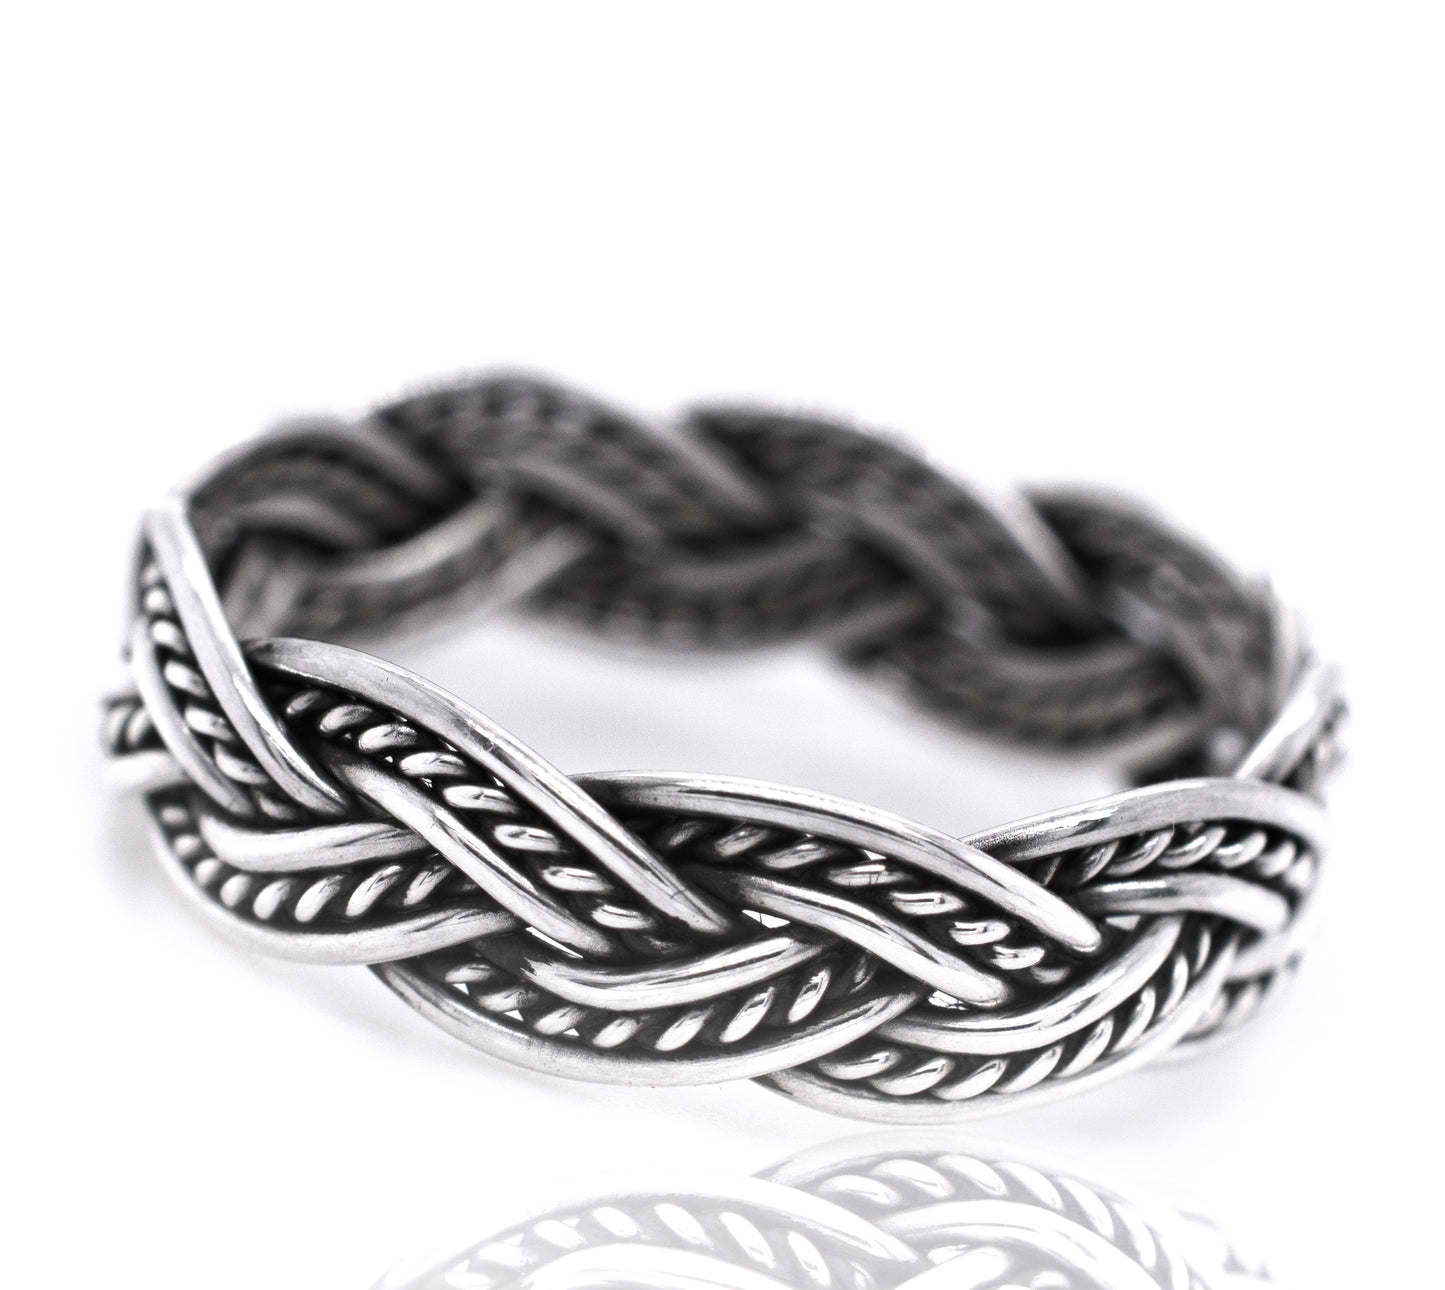 A Super Silver Twisting Rope Band, featuring an intricately woven rope-like texture.